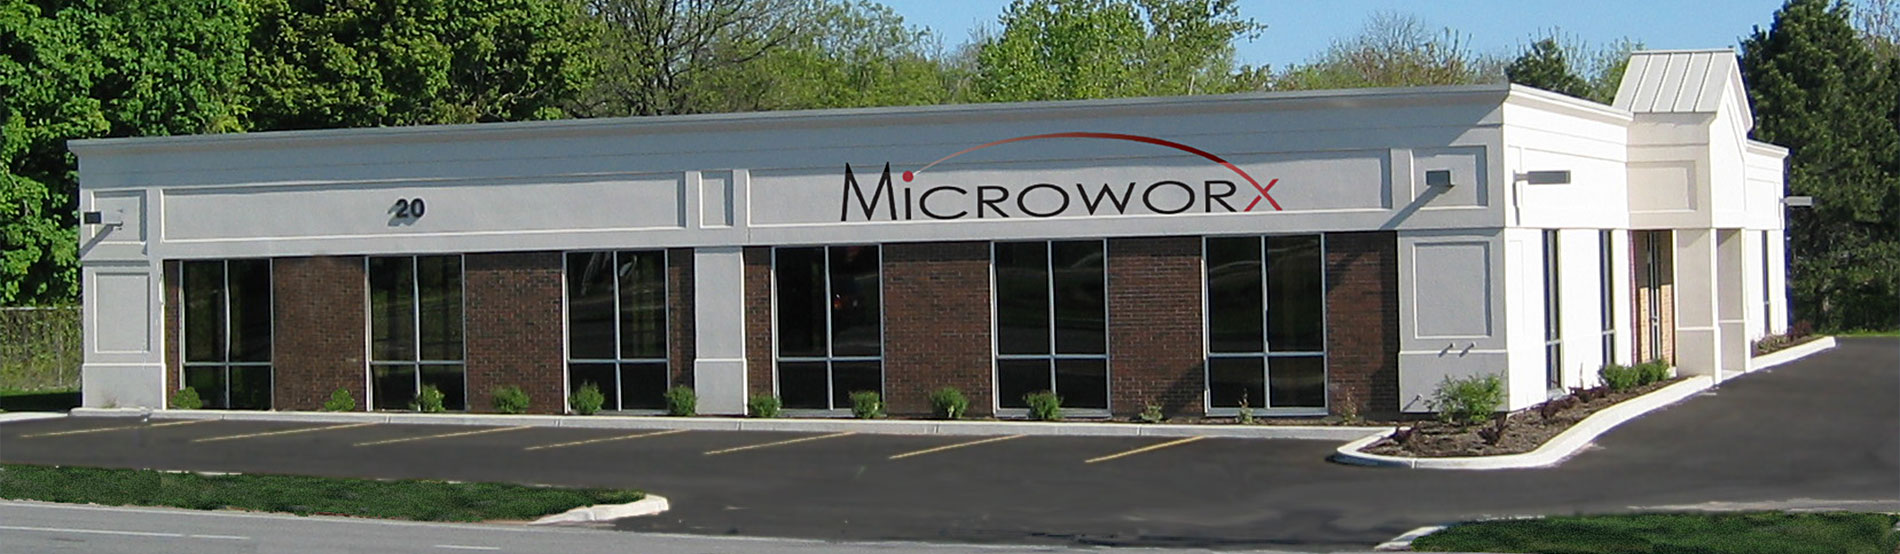 Microworx-banner10